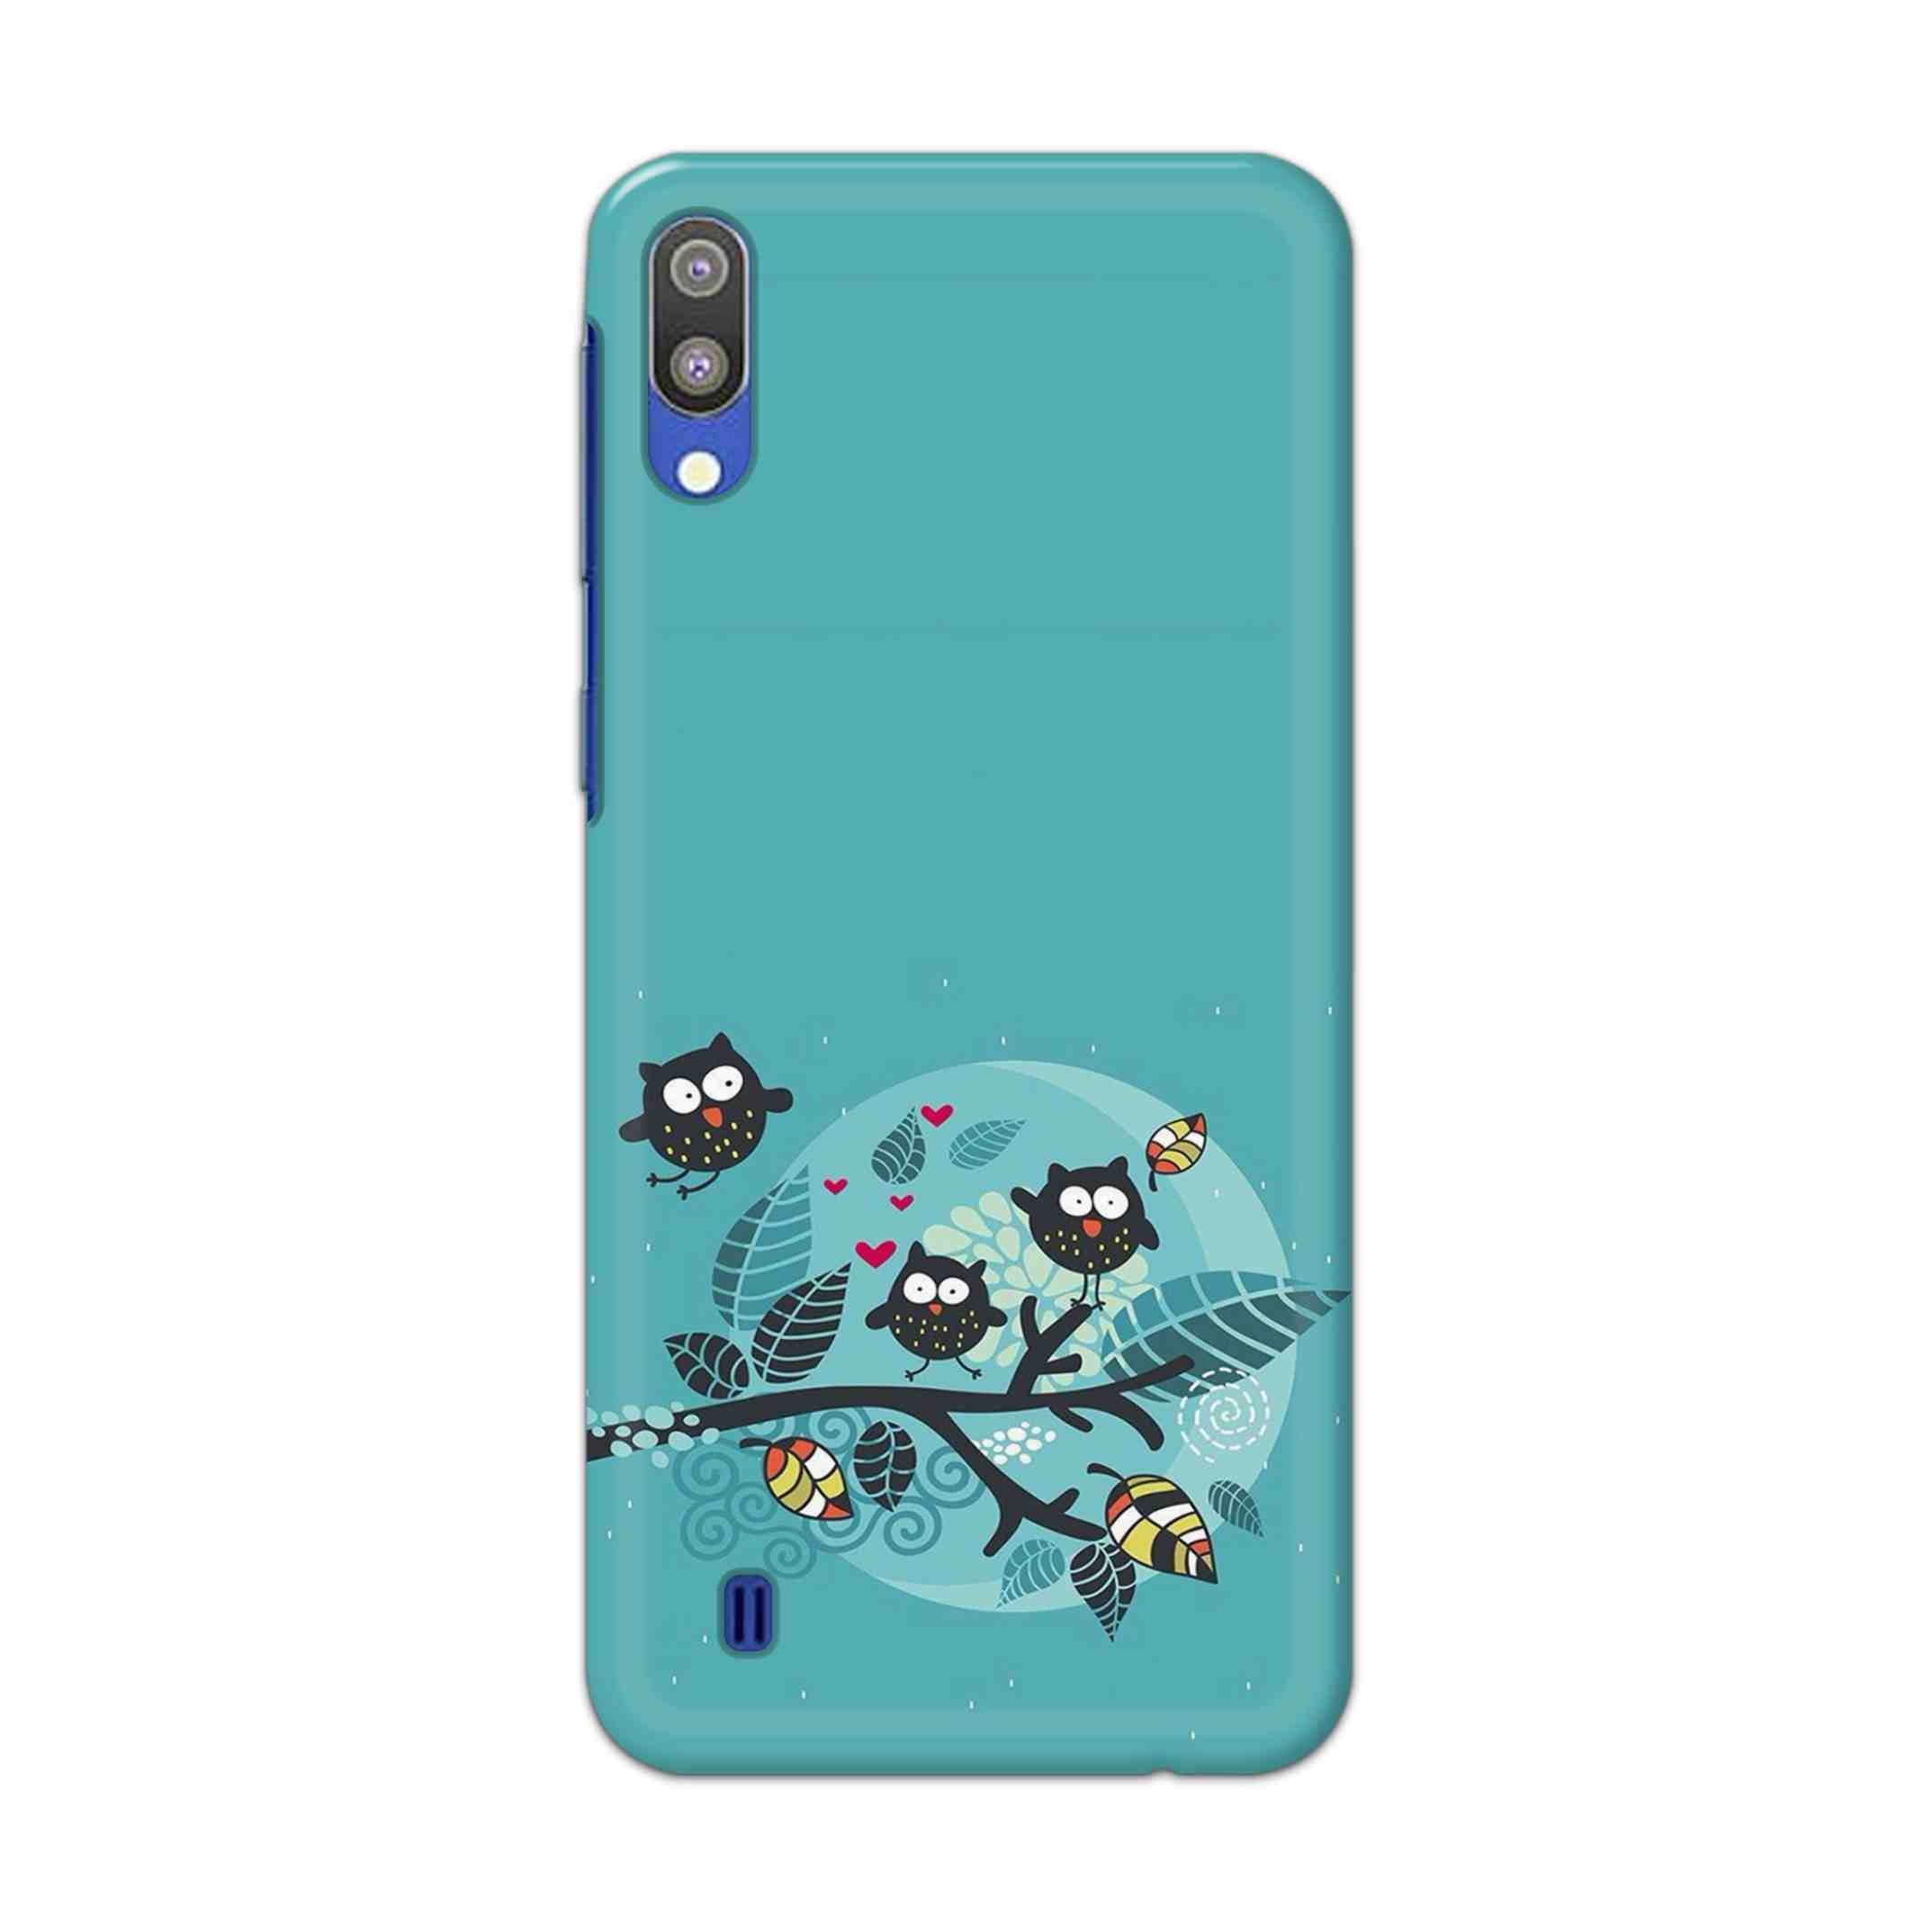 Buy Owl Hard Back Mobile Phone Case Cover For Samsung Galaxy M10 Online